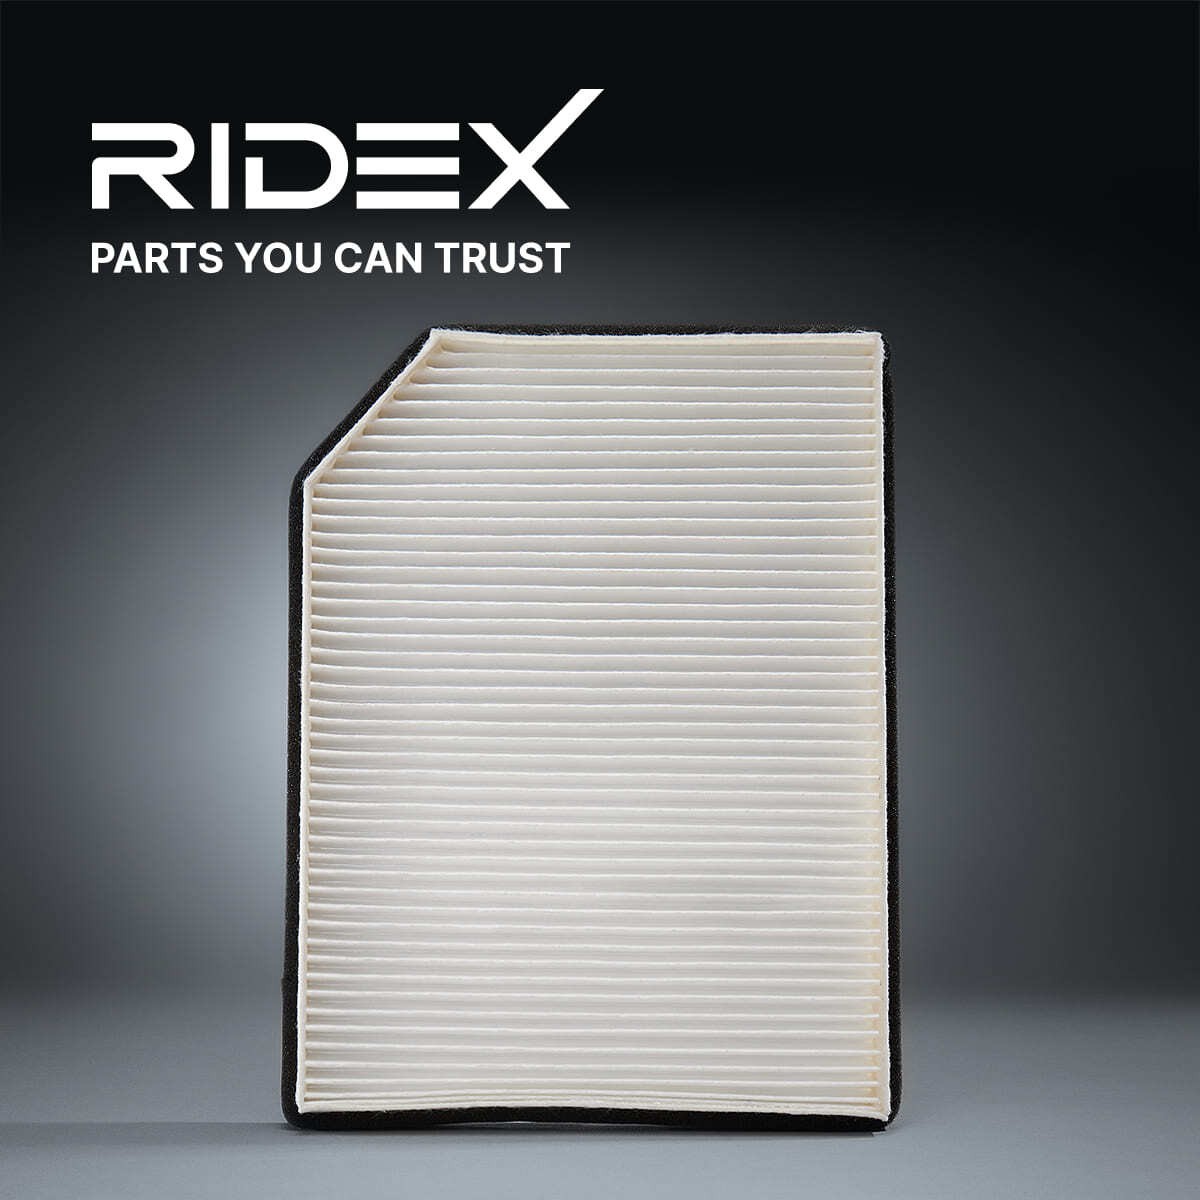 RIDEX Air conditioning filter 424I0007 for TOYOTA COROLLA, AVENSIS, HILUX